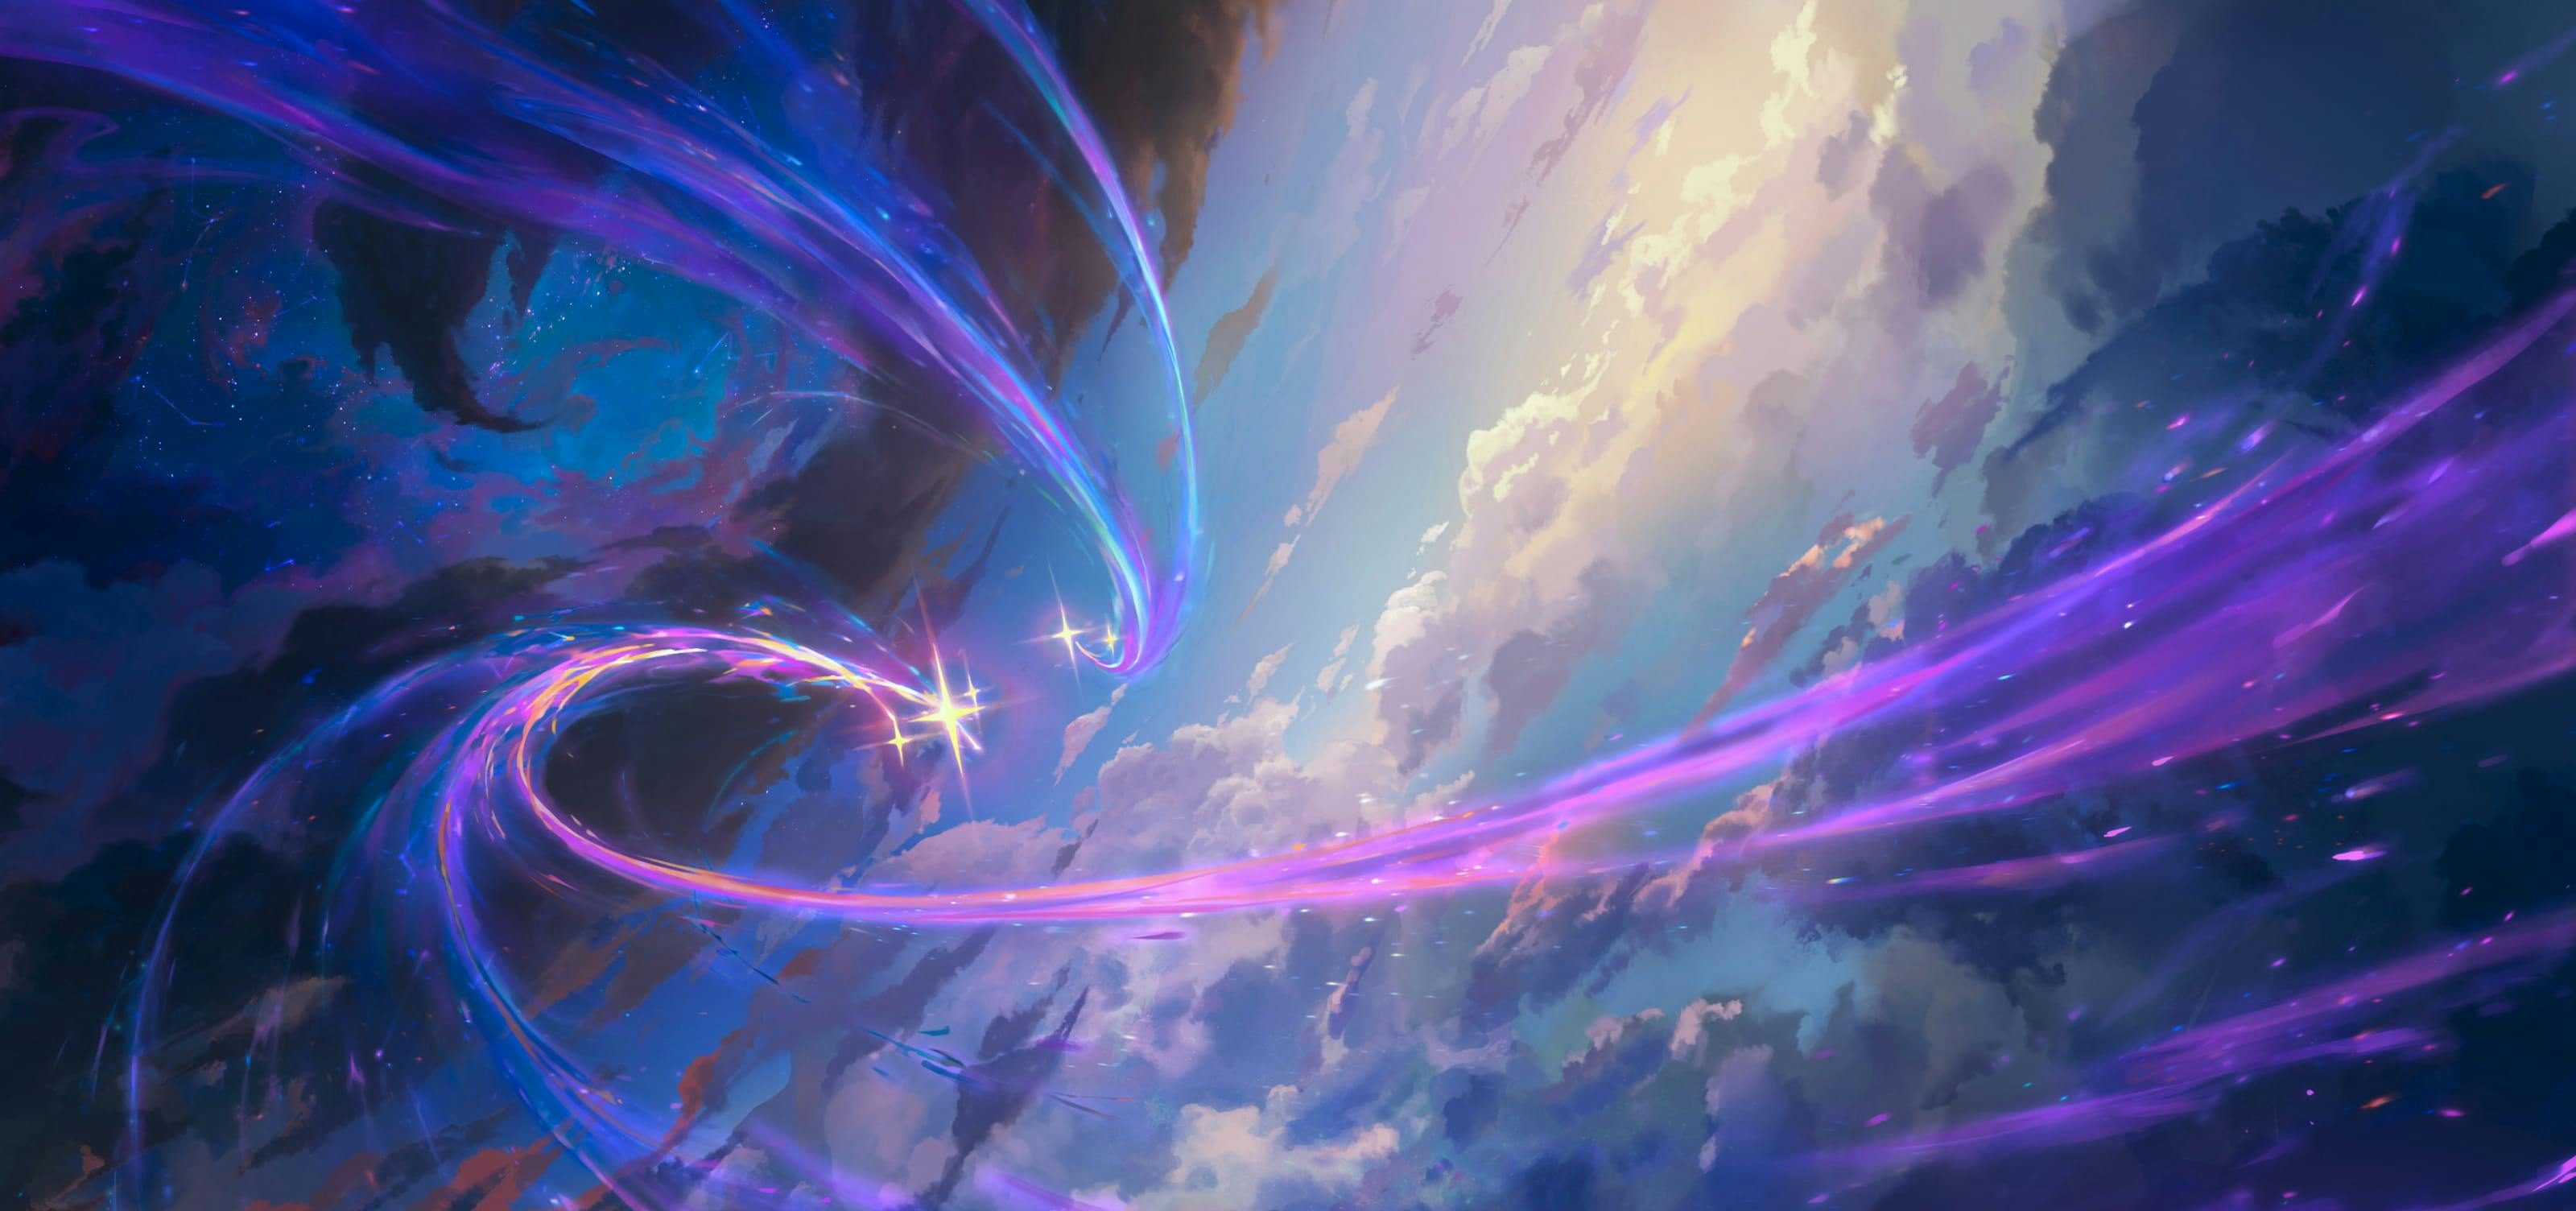 Illustration of Valoran sky, we see the star guardian magical trails across the clouds.